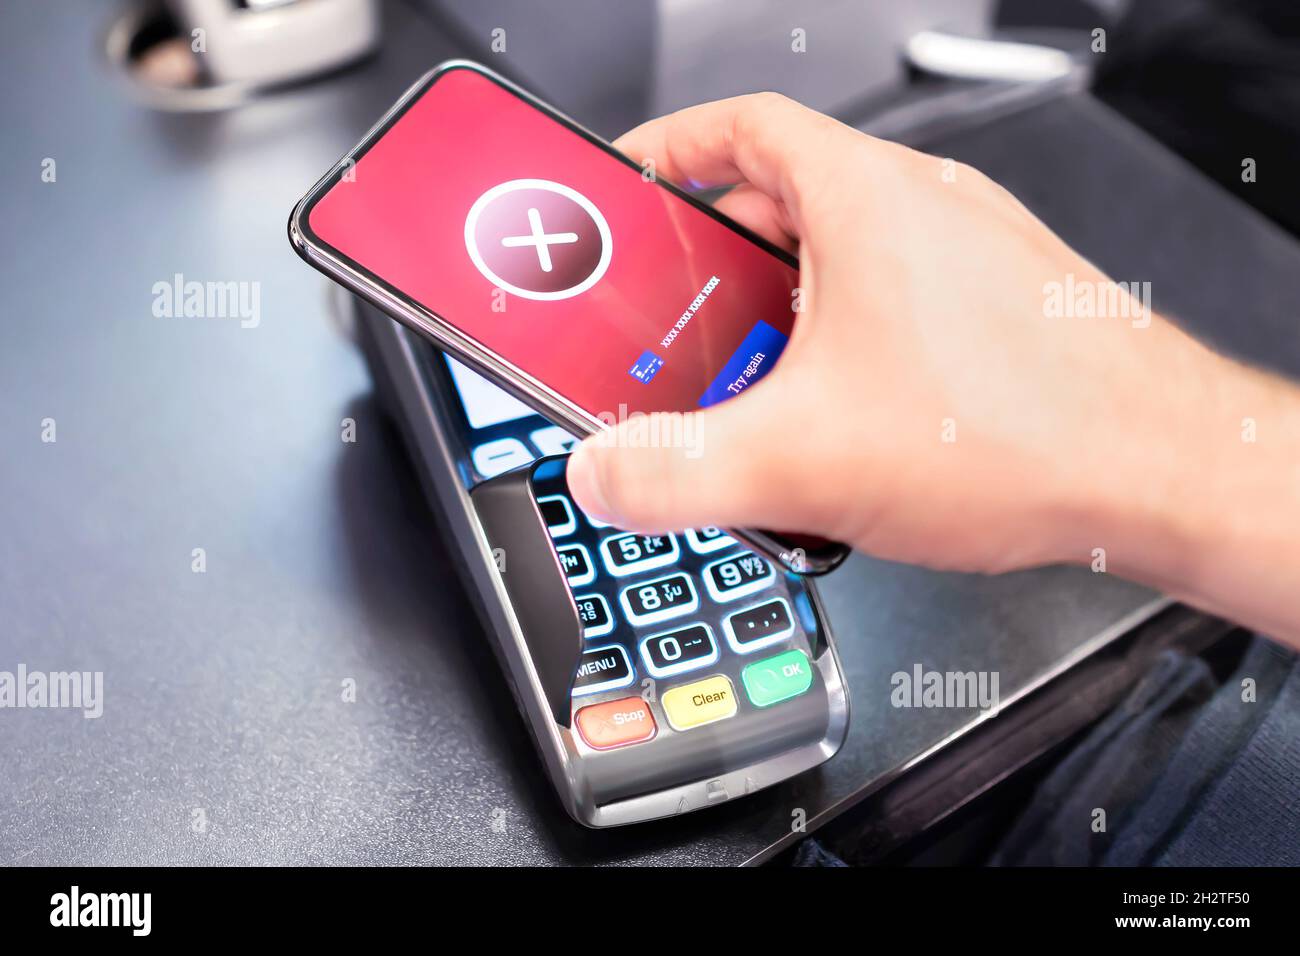 Payment error while paying with phone. Problem with mobile wallet. Digital transaction fail. Cancel purchase. Contactless nfc technology failure. Stock Photo